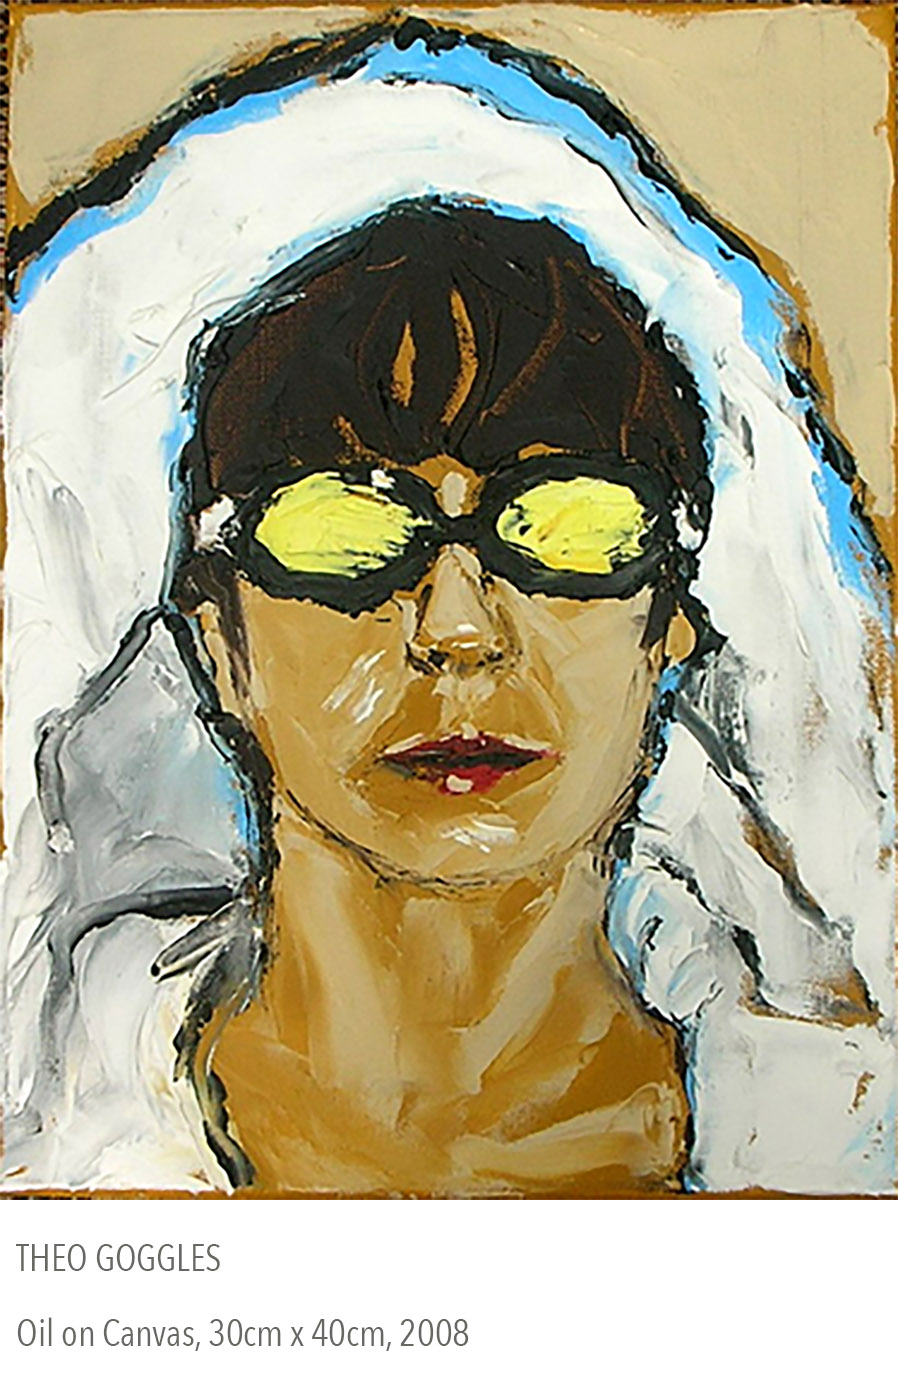 2008 oil painting called Theo Goggles